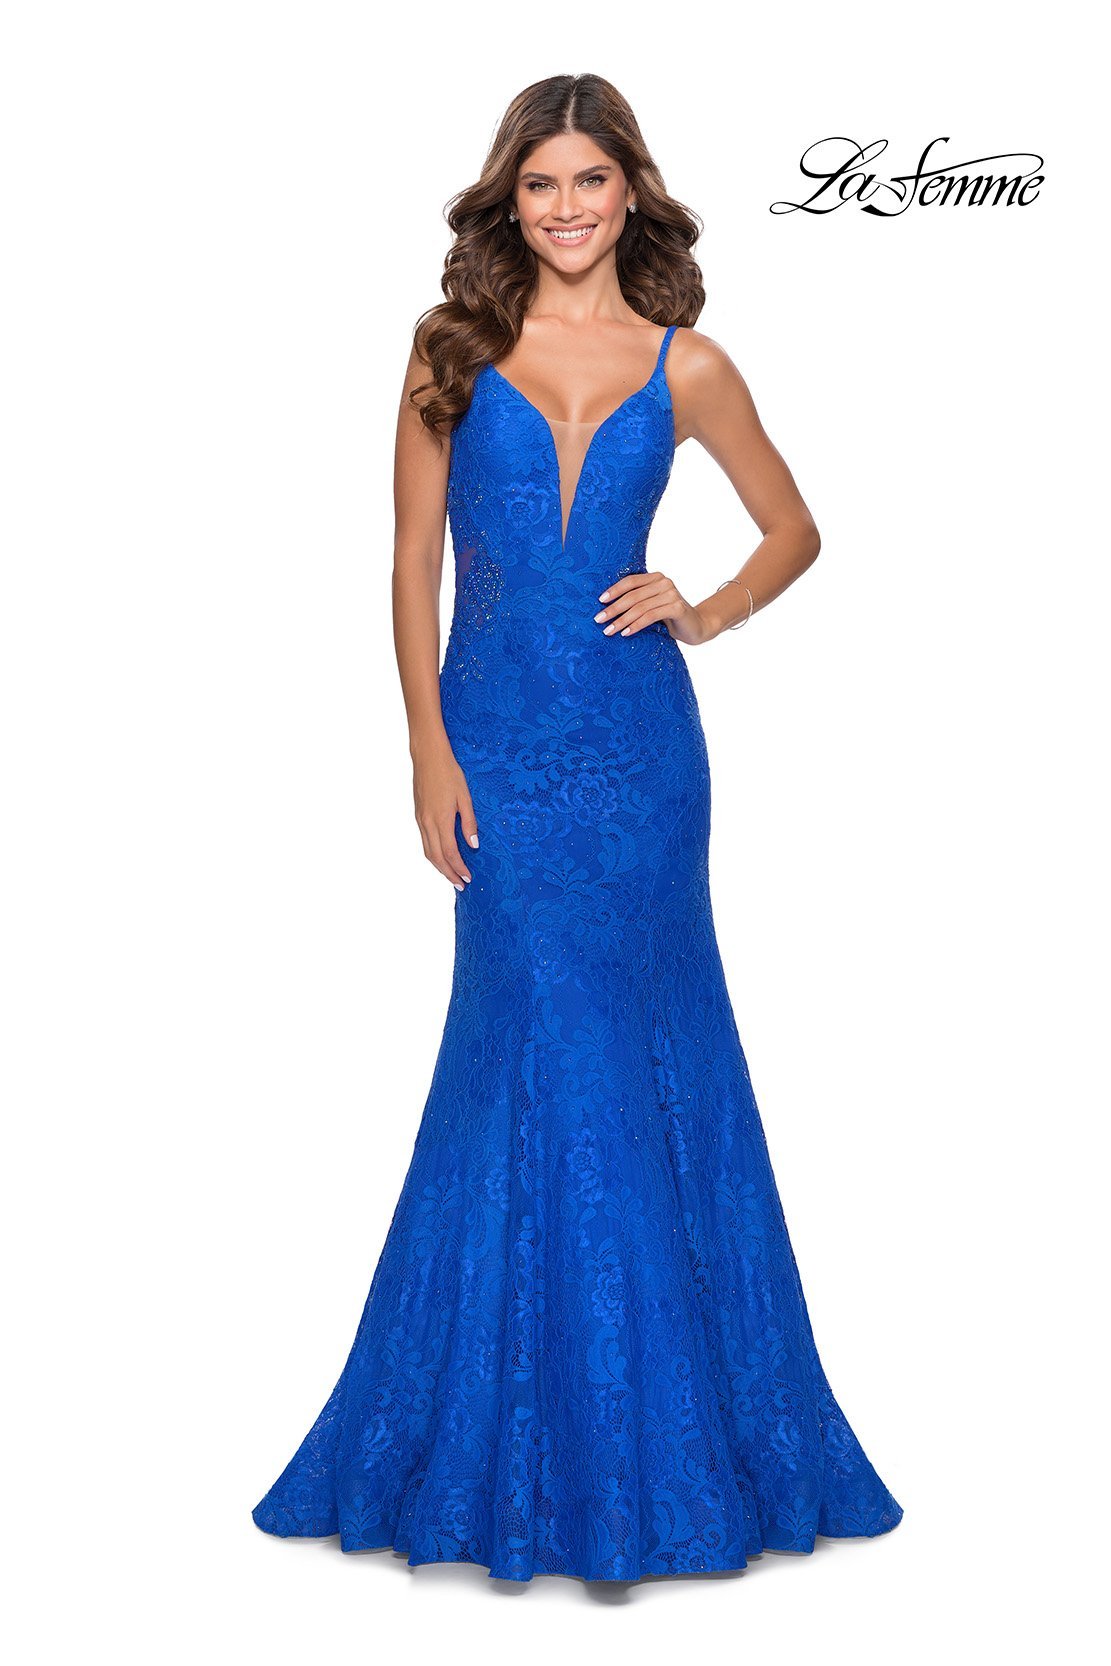 La Femme 28355 dress images in these colors: Black, Electric Blue, Neon Pink.